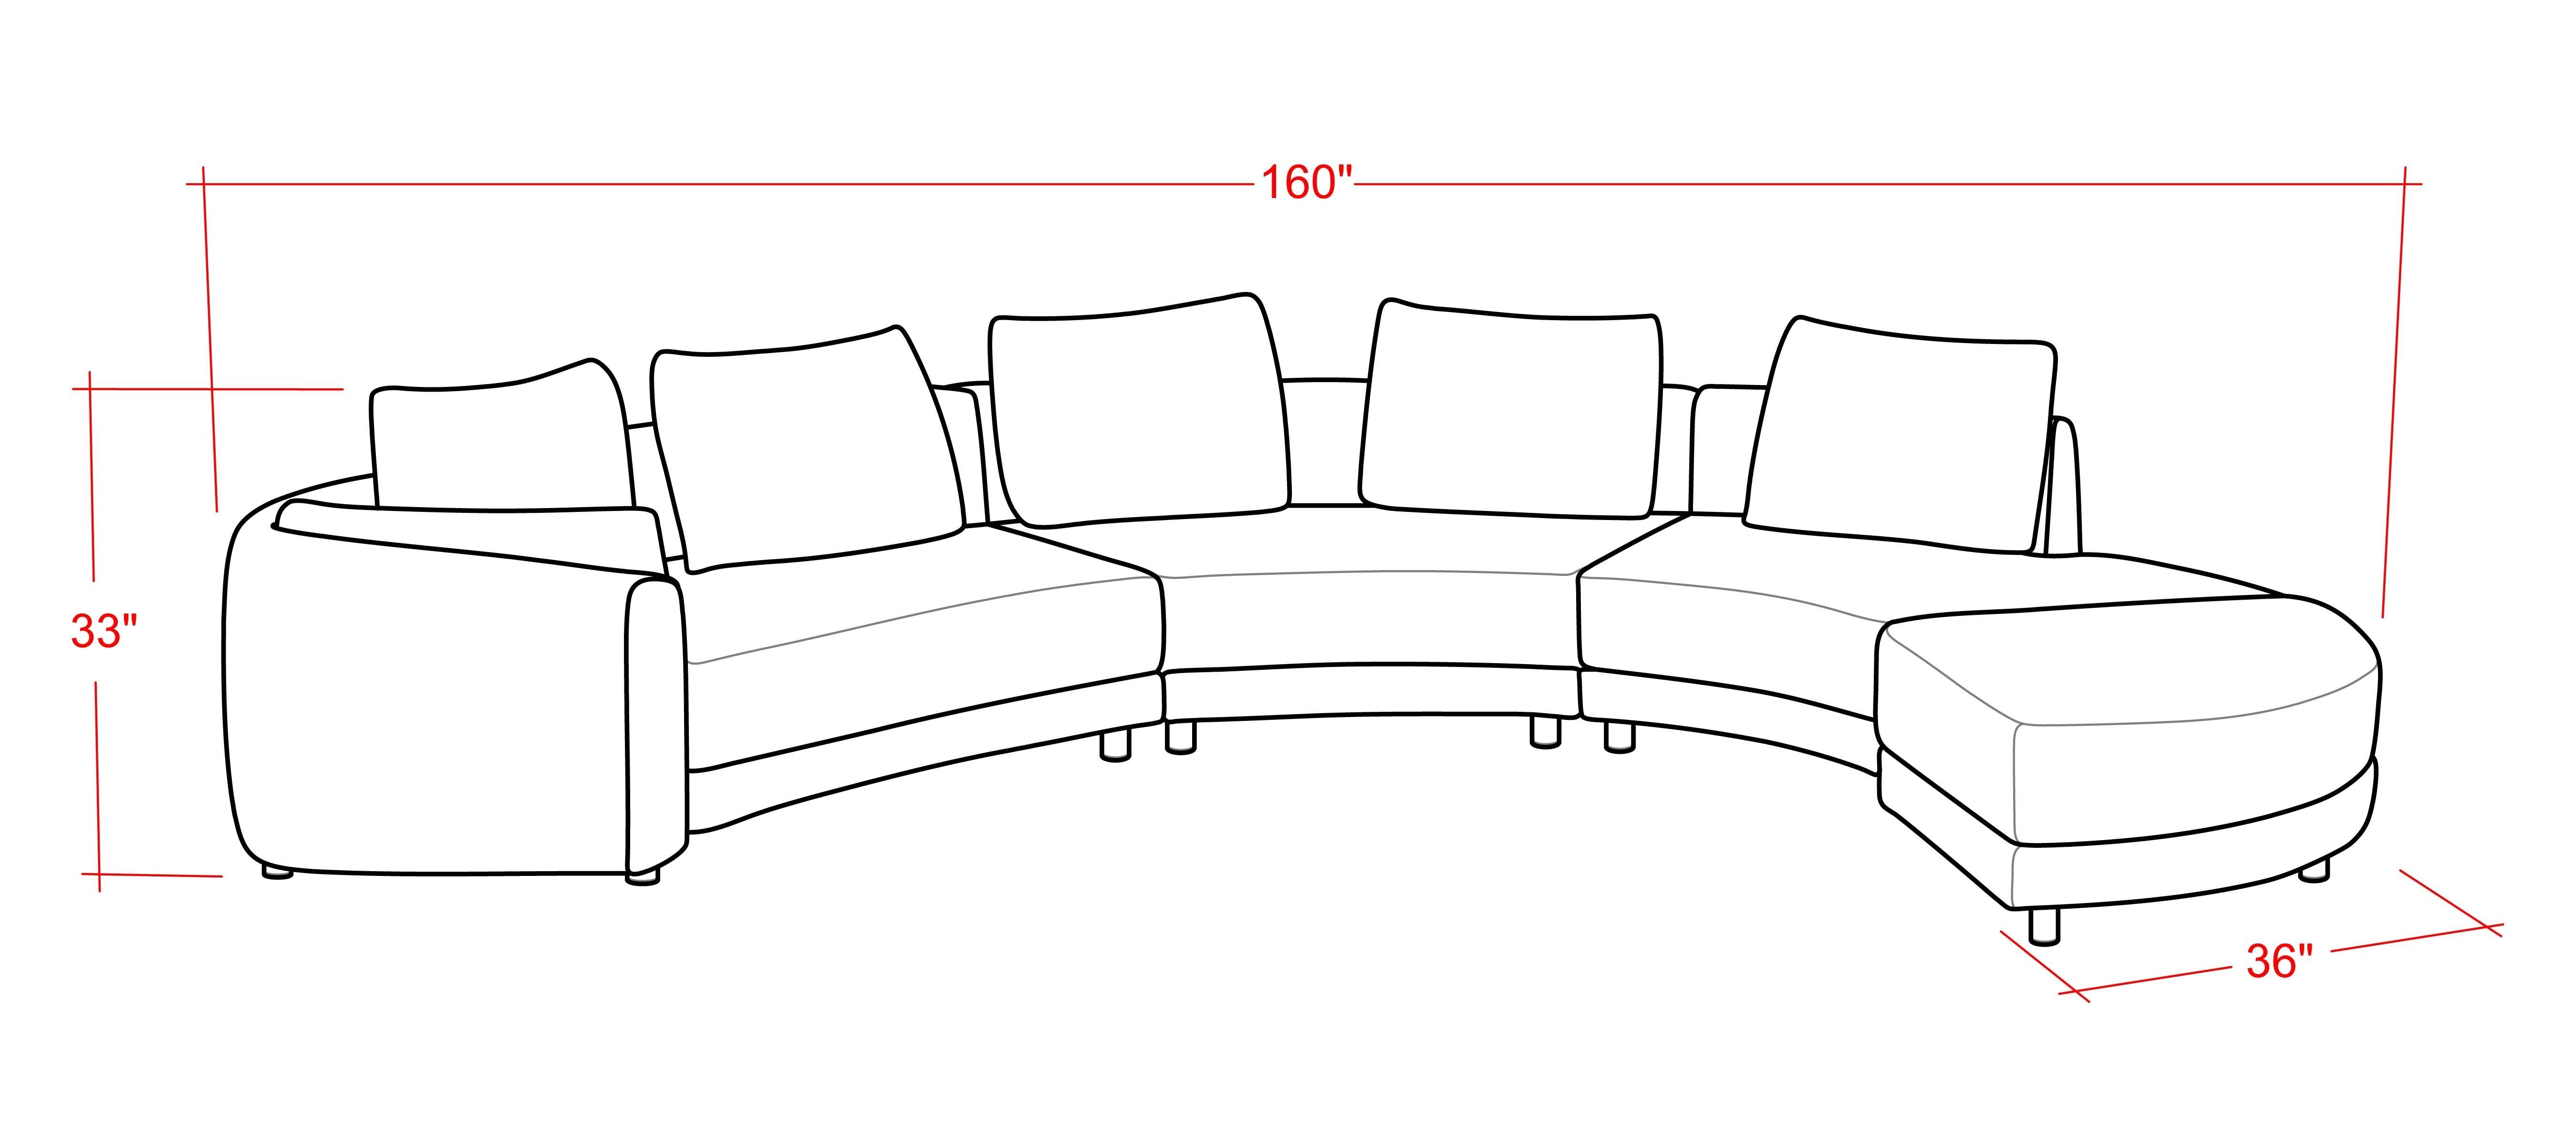 Dimensions Of A Sectional Sofa - Image to u